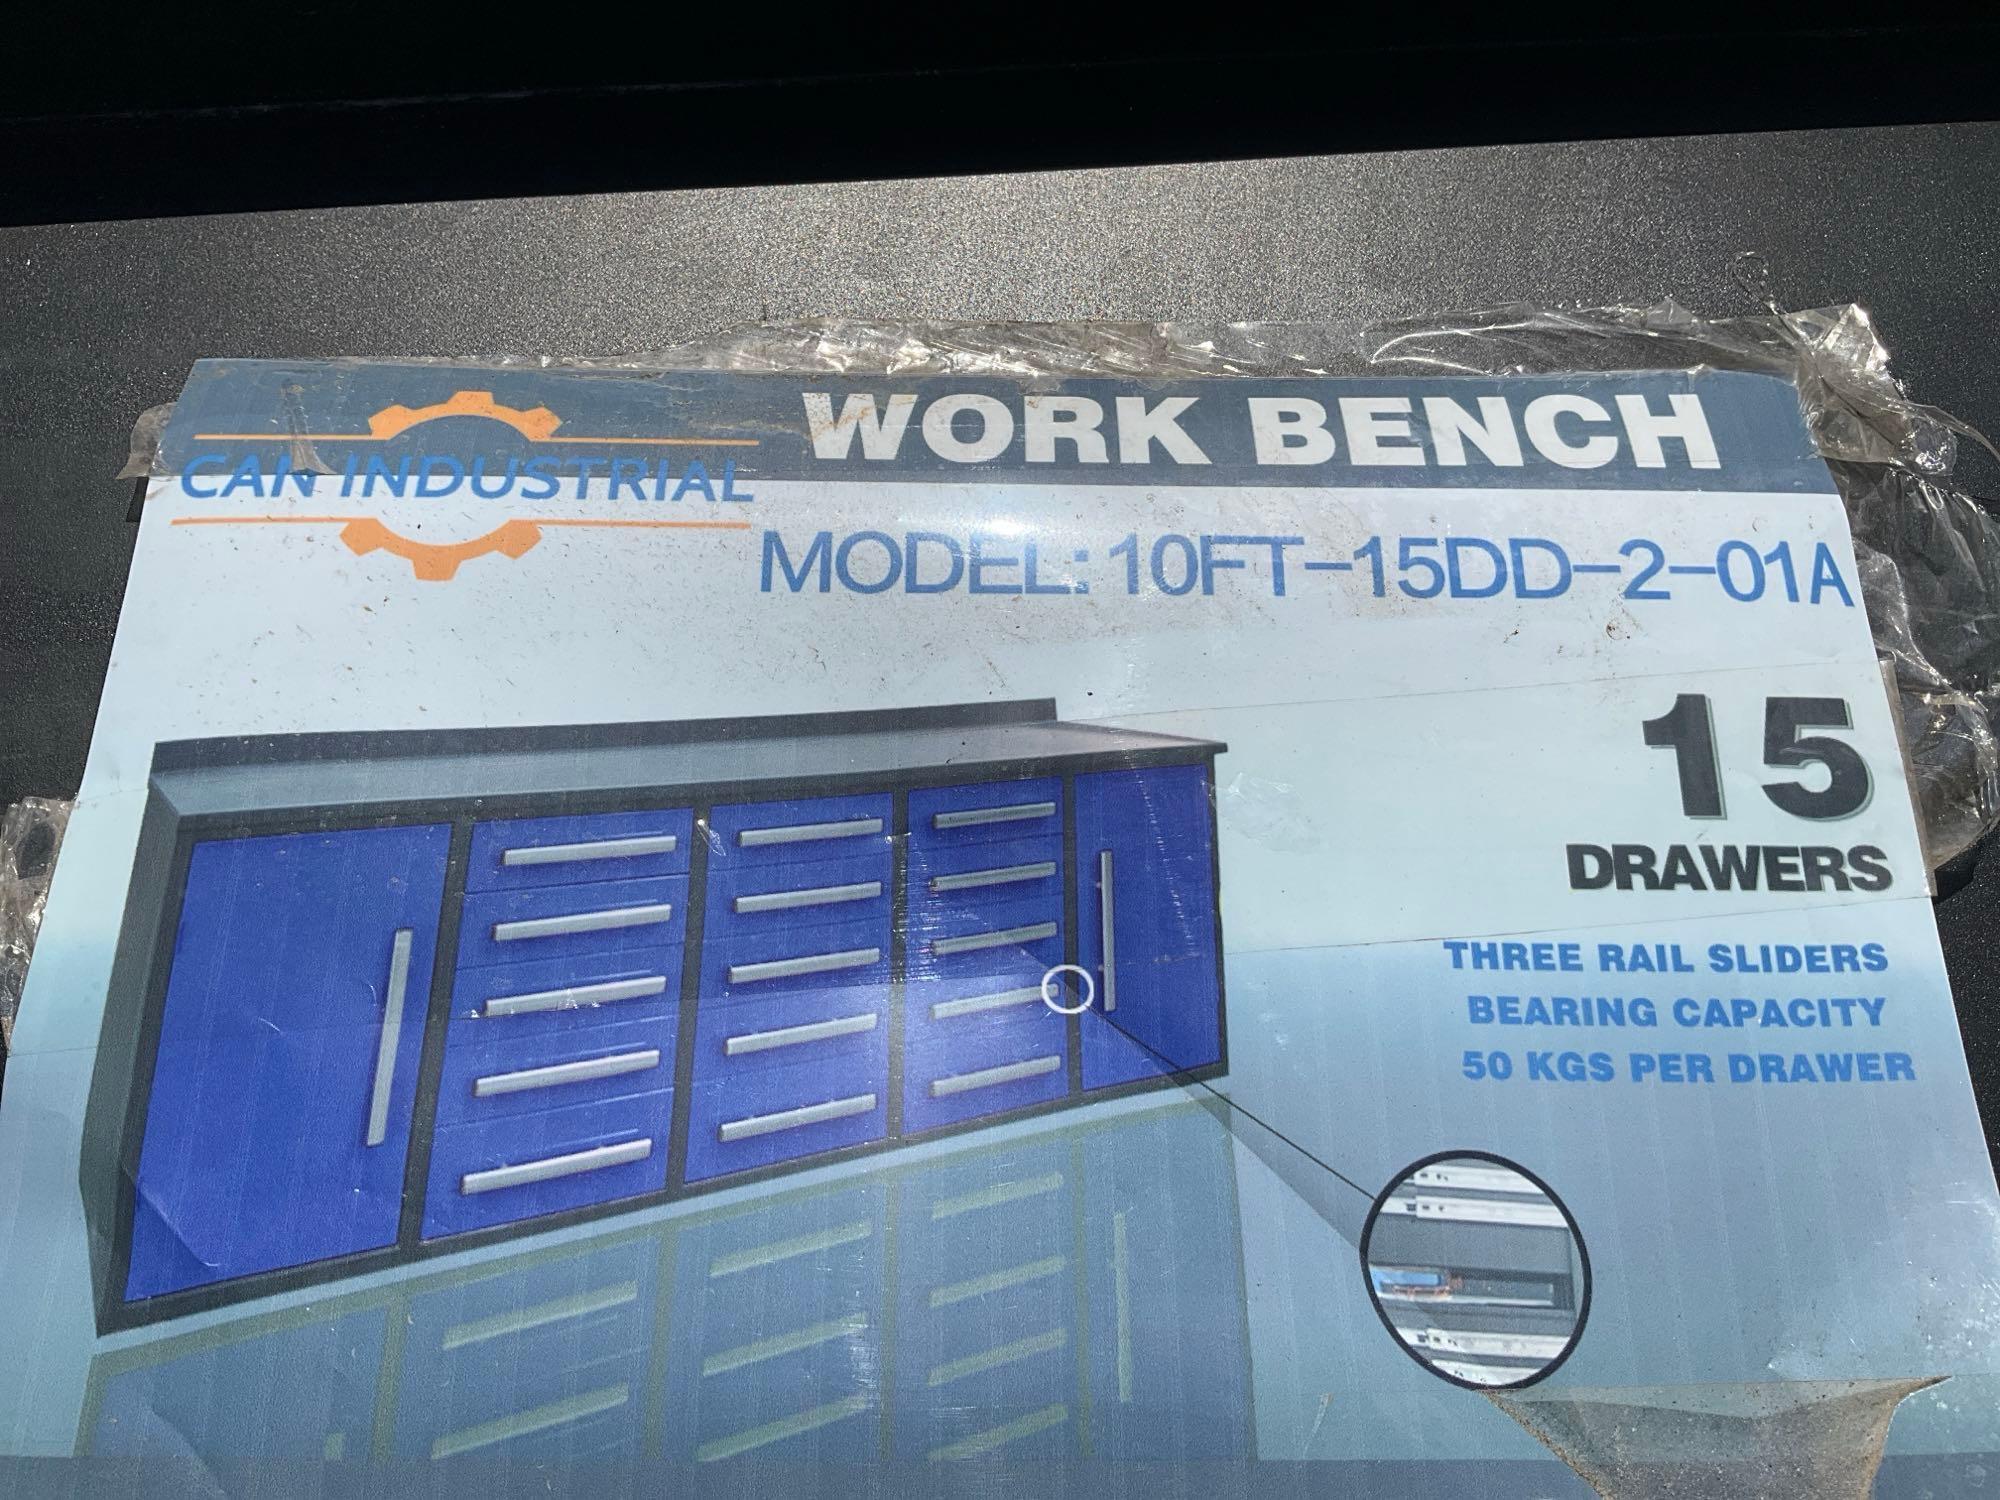 UNUSED CAN INDUSTRIAL WORK BENCH MODEL 10FT-15DD-2-01A, 10FT, 15 DRAWERS,...THREE RAIL SLIDERS